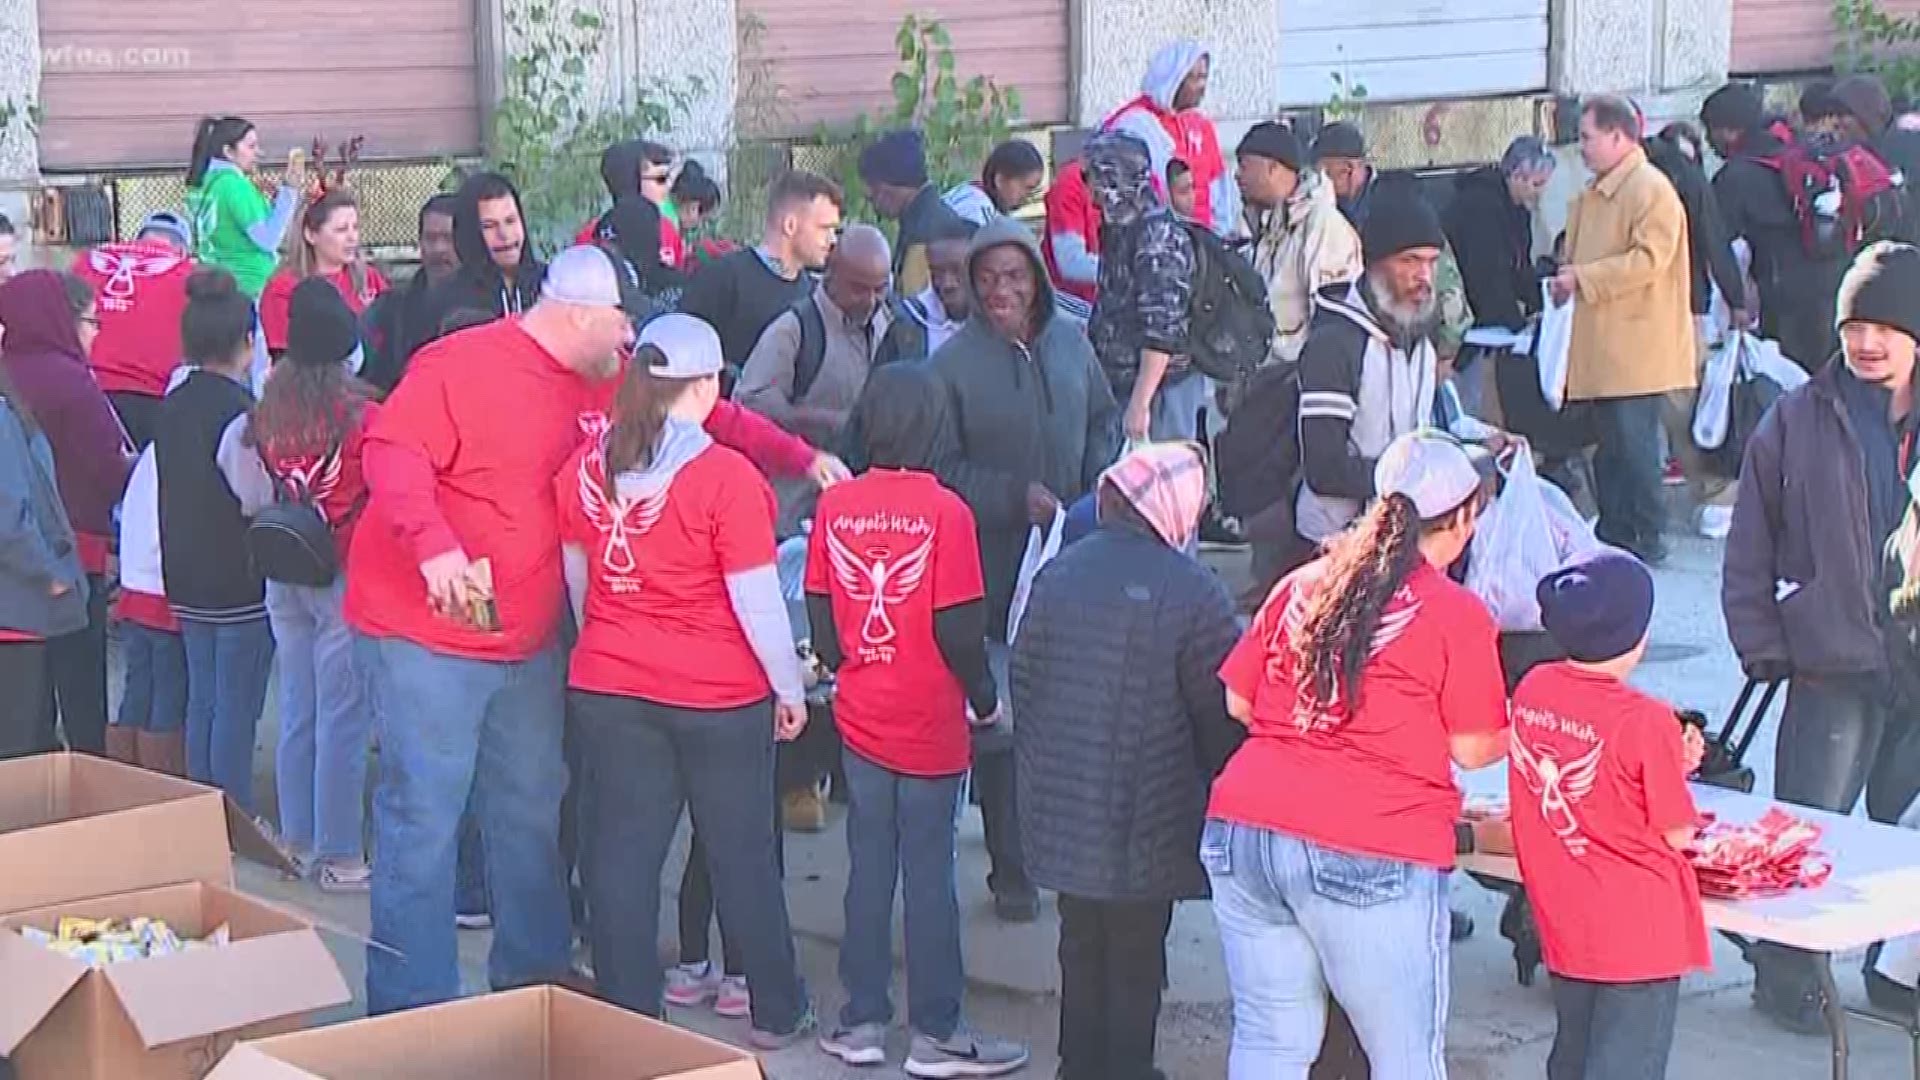 Angel's Wish helps to donate items to Dallas-area homeless people.